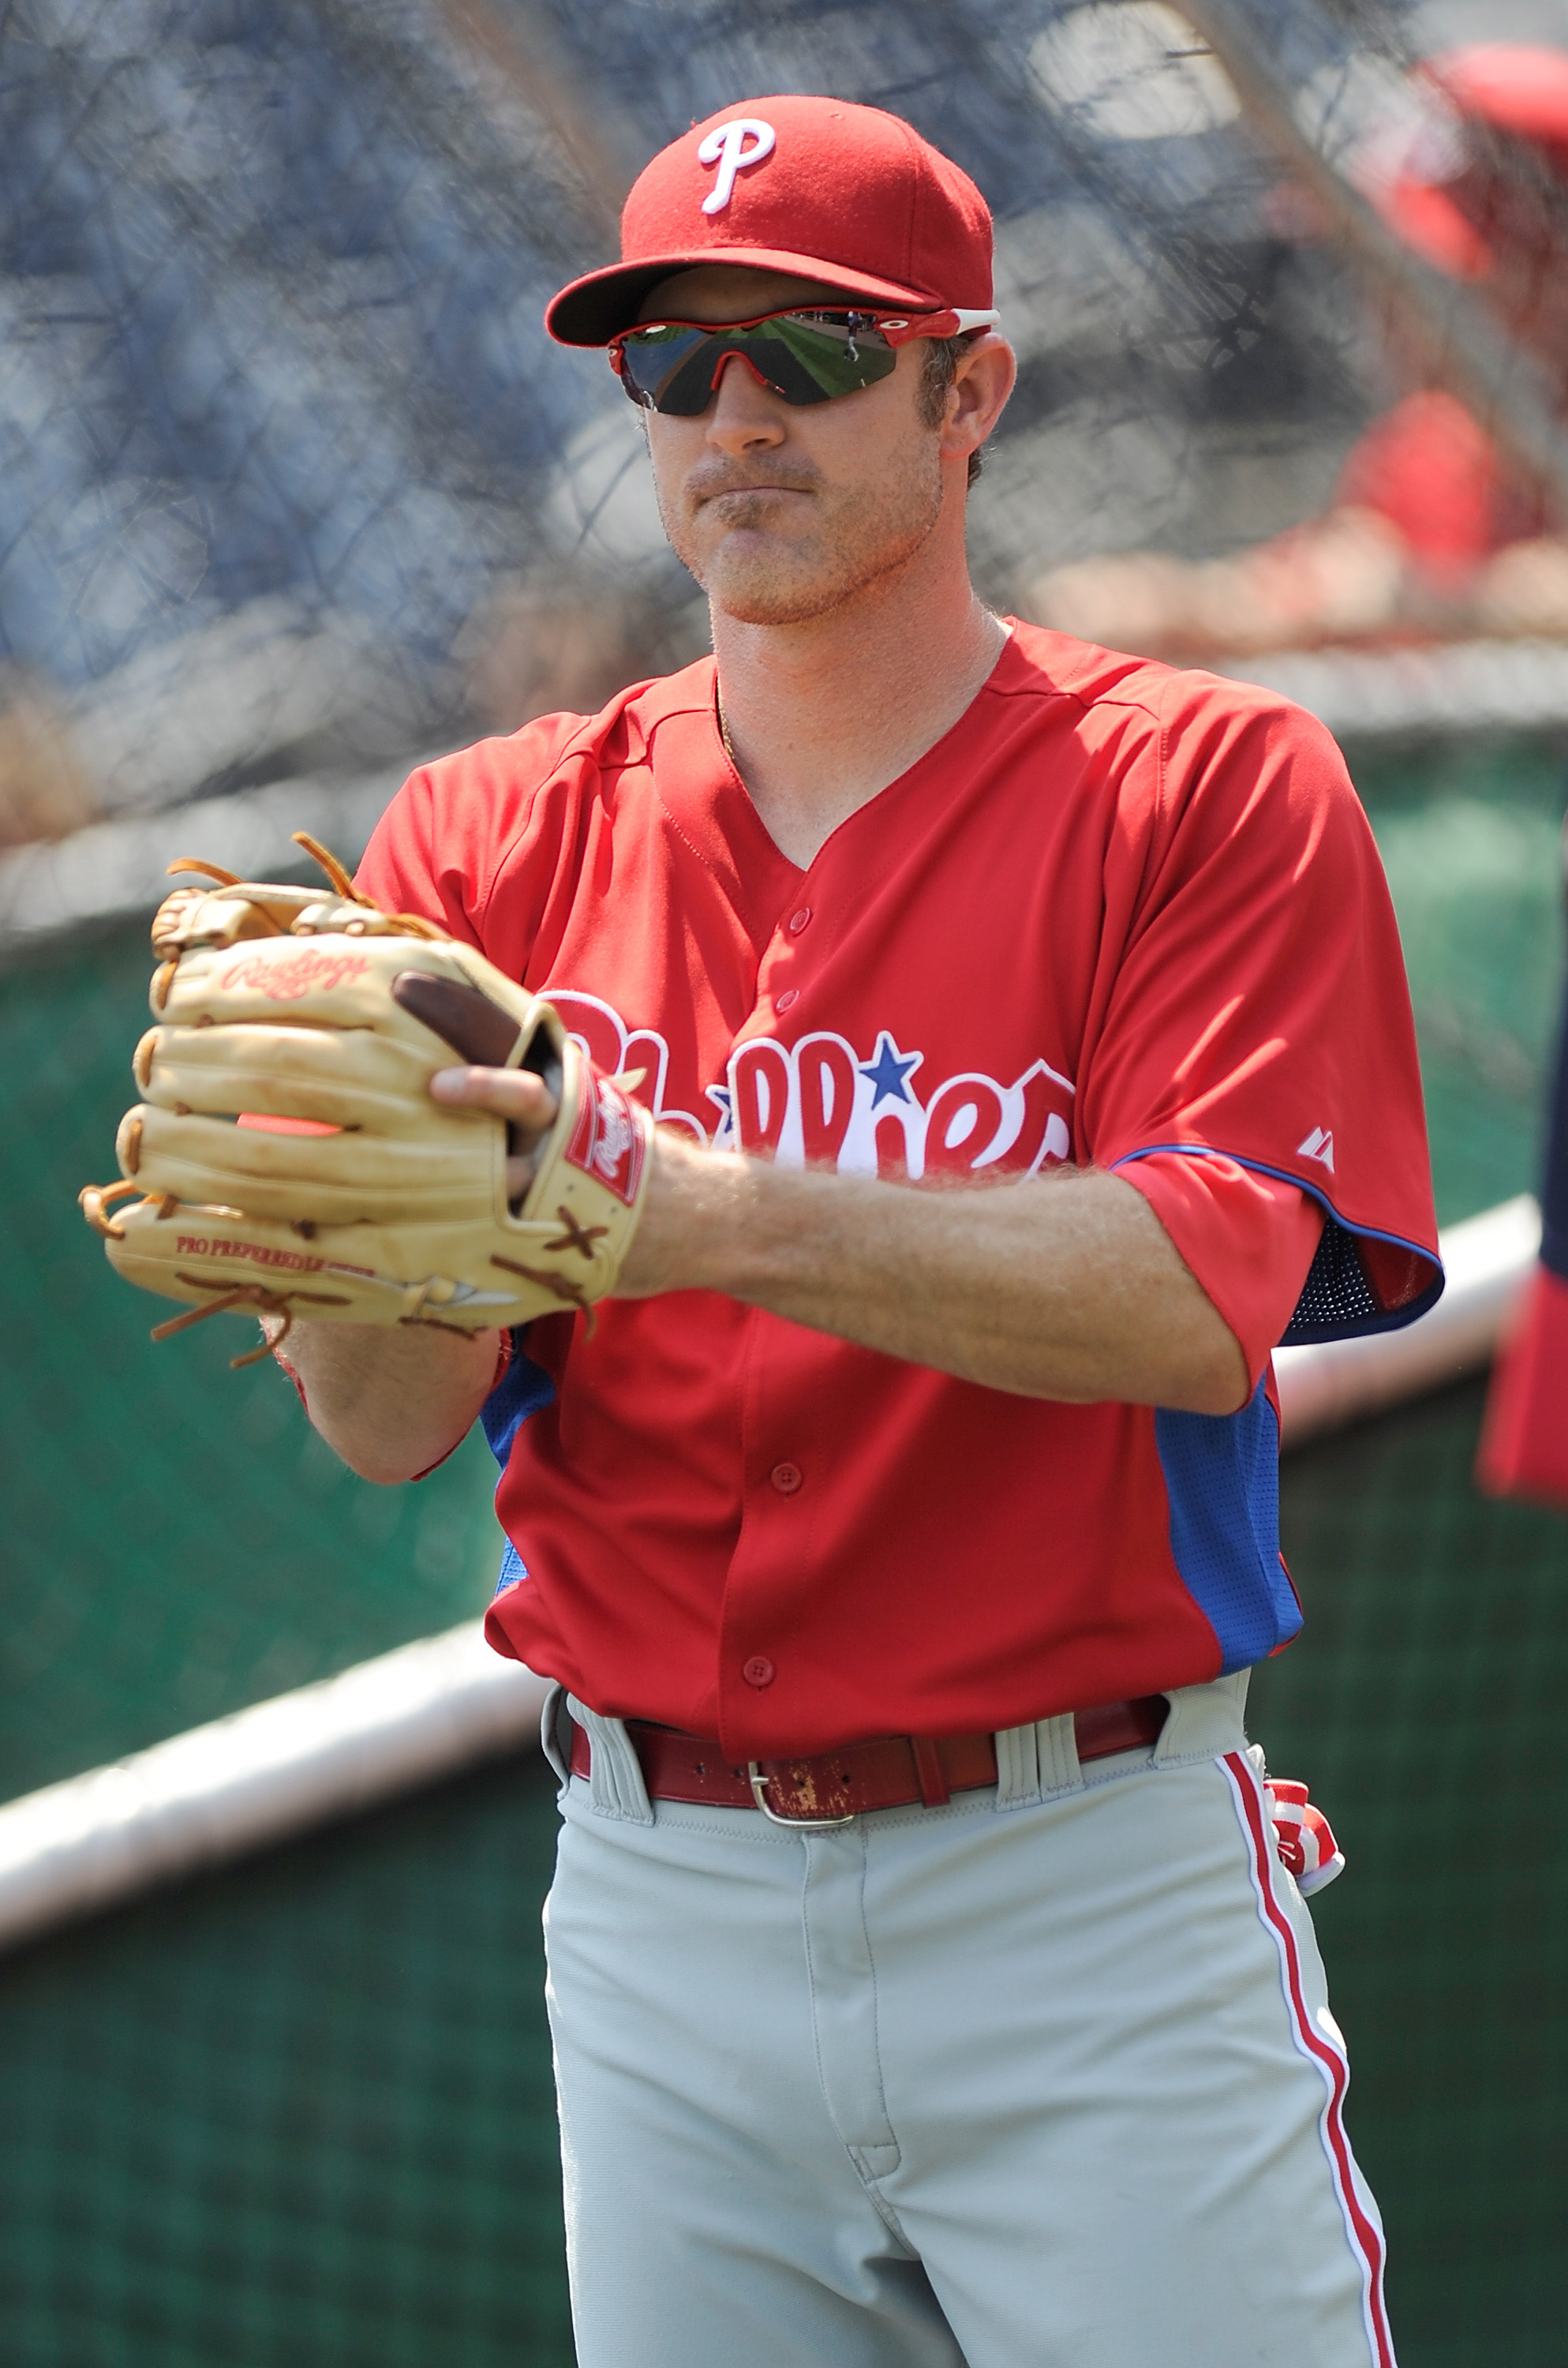 WASHINGTON, DC - MAY 30:  Chase Utley #26 of the Philadelphia Phillies warms up before the game against the Washington Nationals at Nationals Park on May 30, 2011 in Washington, DC.  (Photo by Greg Fiume/Getty Images)